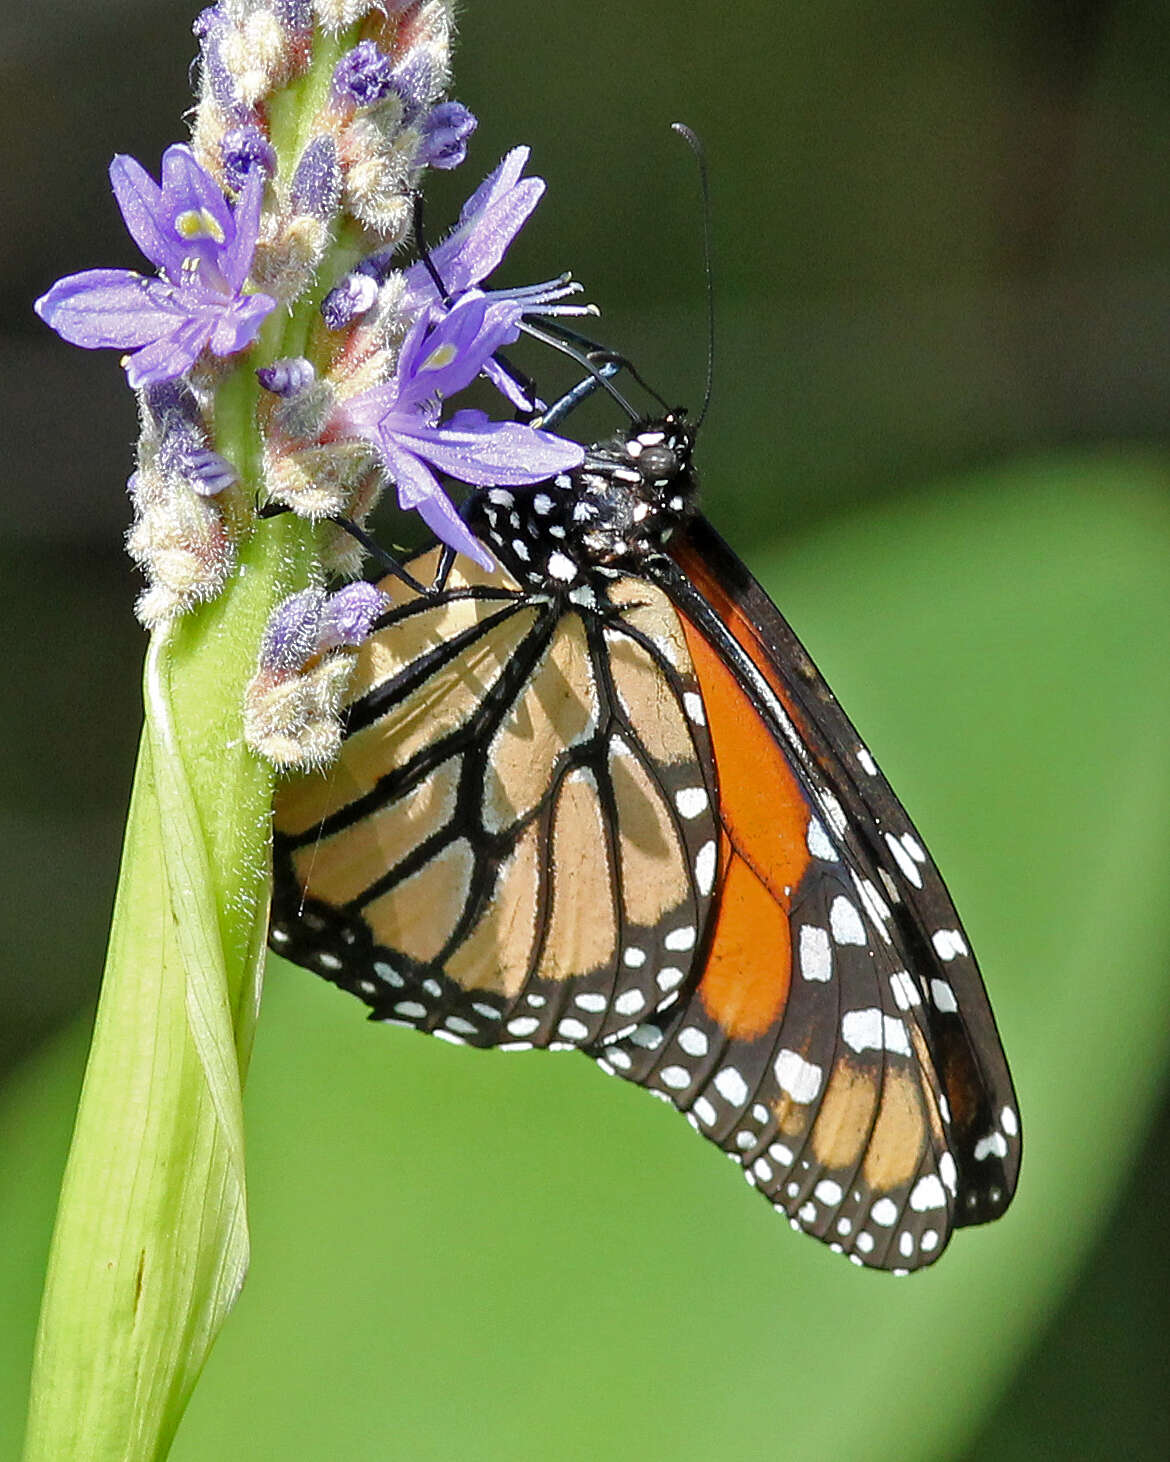 Image of Monarch Butterfly